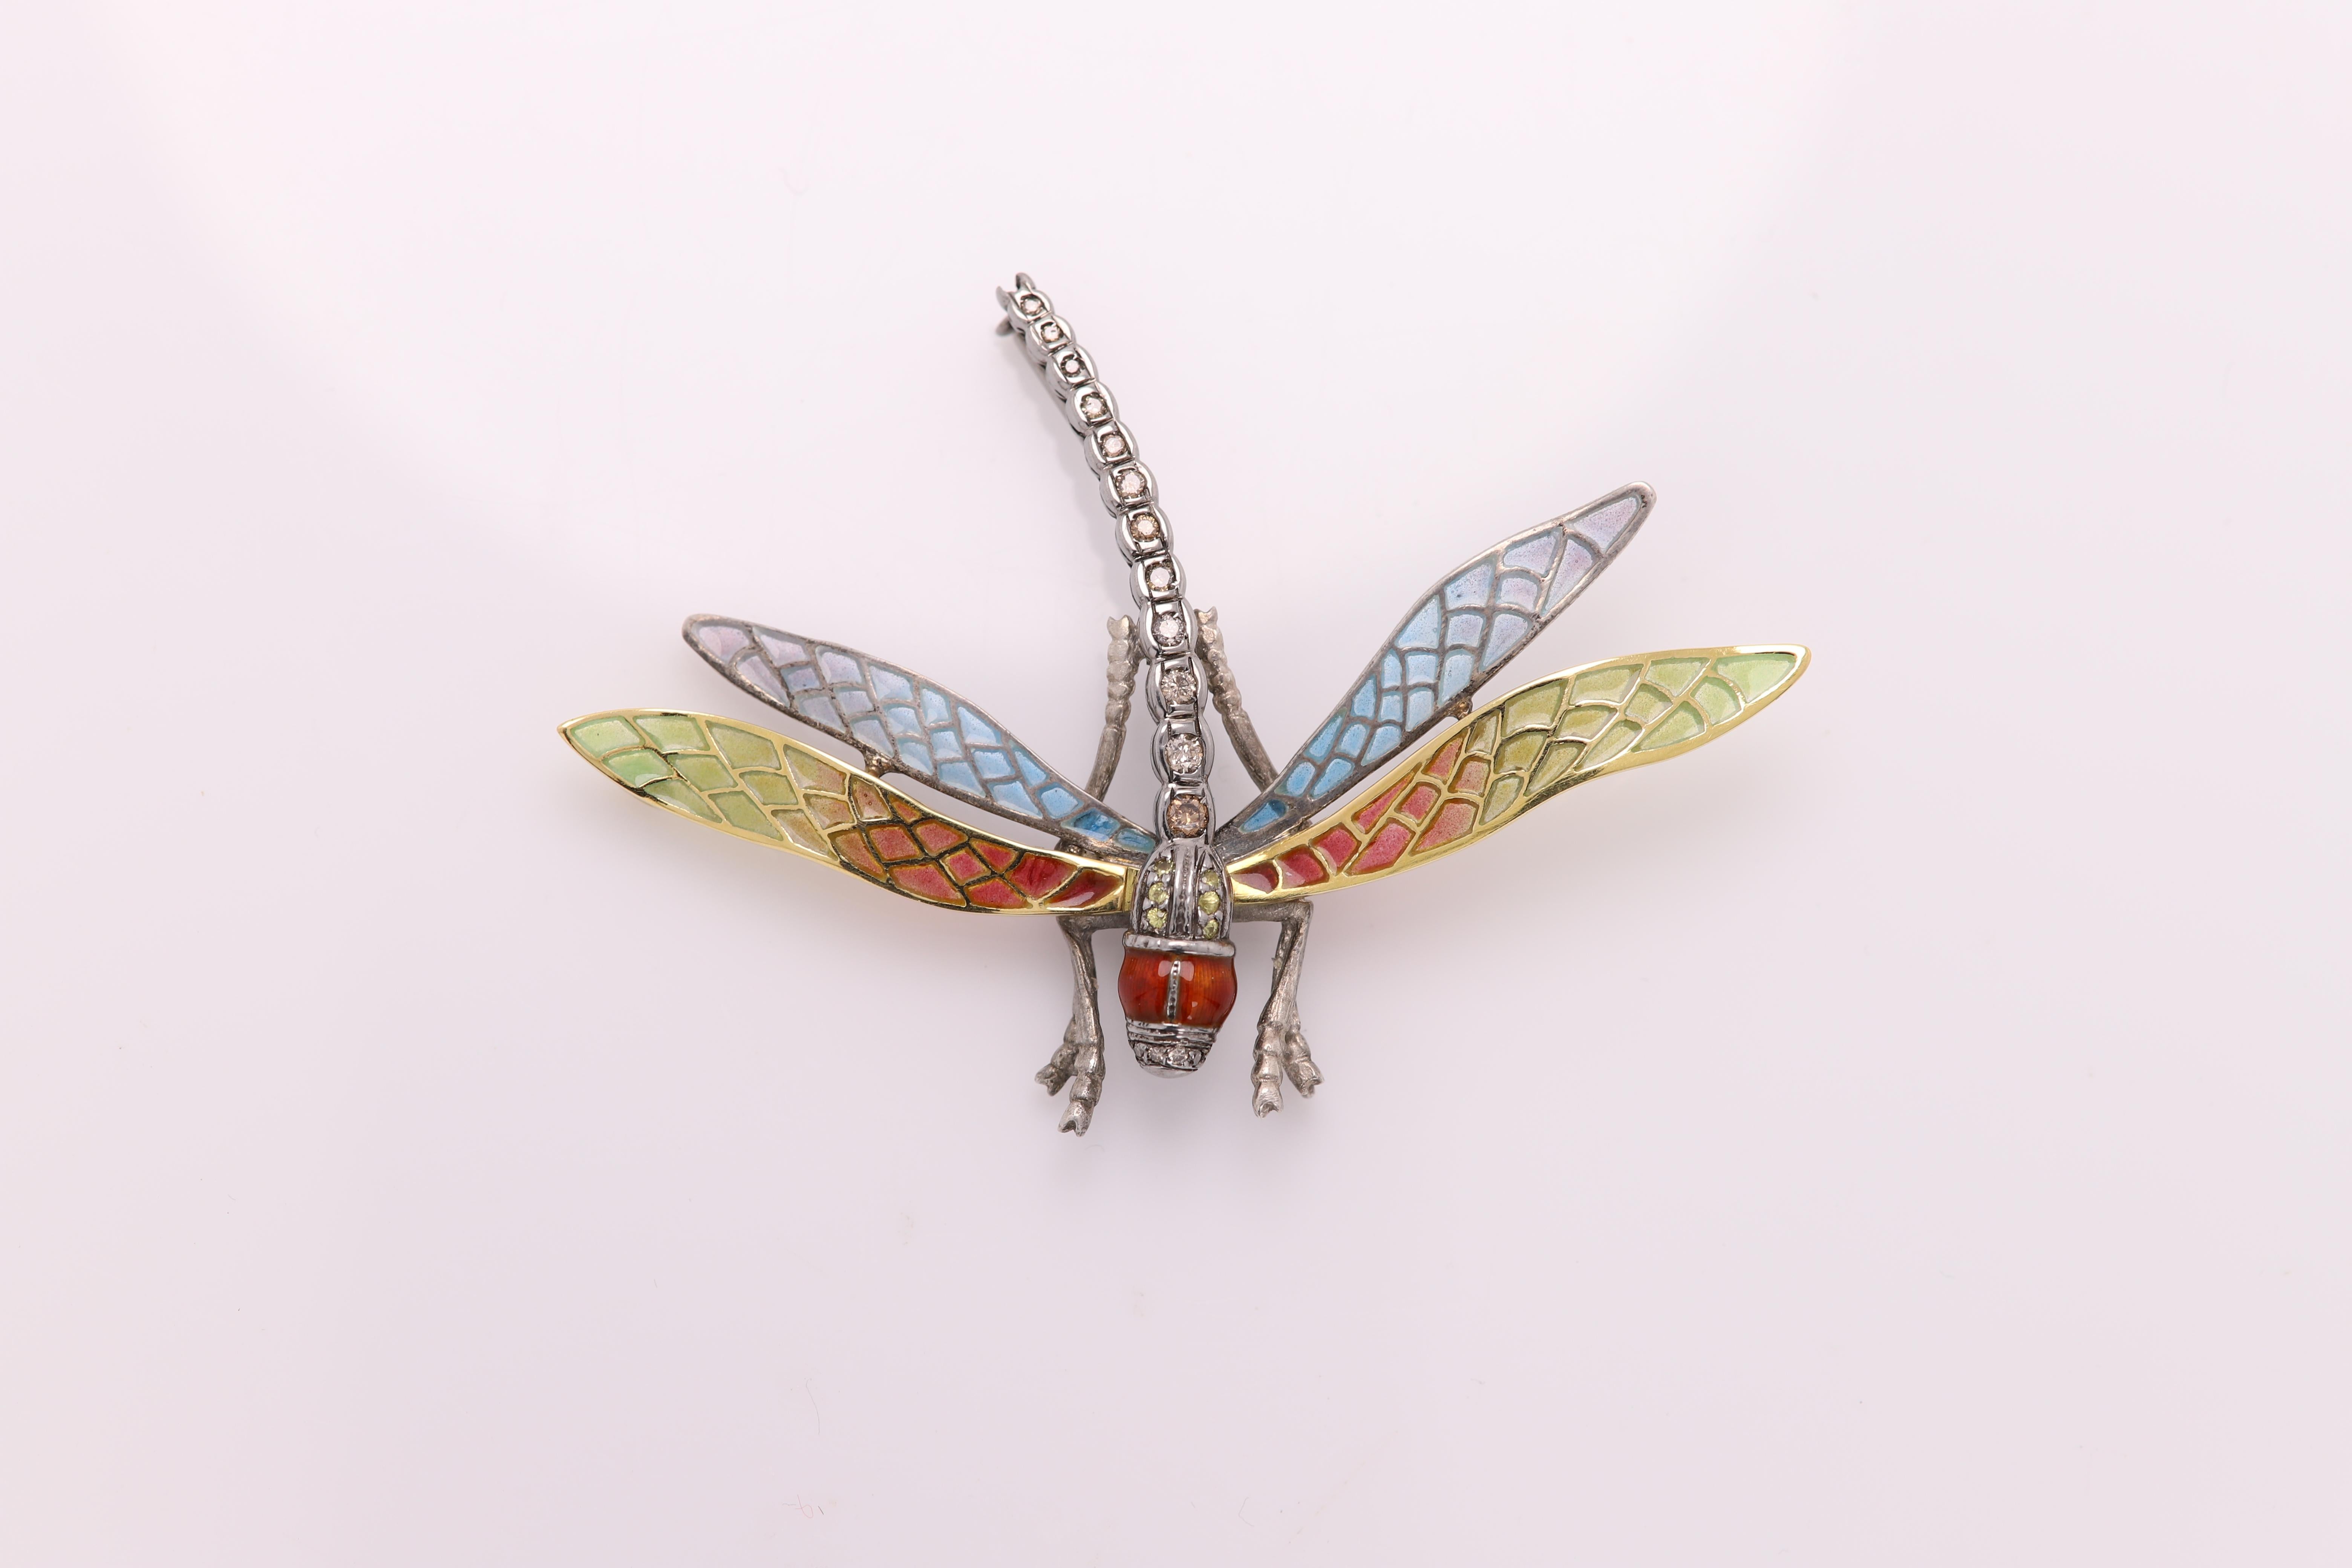 Magnificent VINTAGE DRAGONFLY BROOCH PIN / NECKLACE
Hand made in Spain with brilliant colors of Enamel
Sterling Silver 925 (oxidized) and 18K Yellow Gold
Total weight 11 grams
Brown Diamonds all along the tail + some yellow sapphires
Dimension: